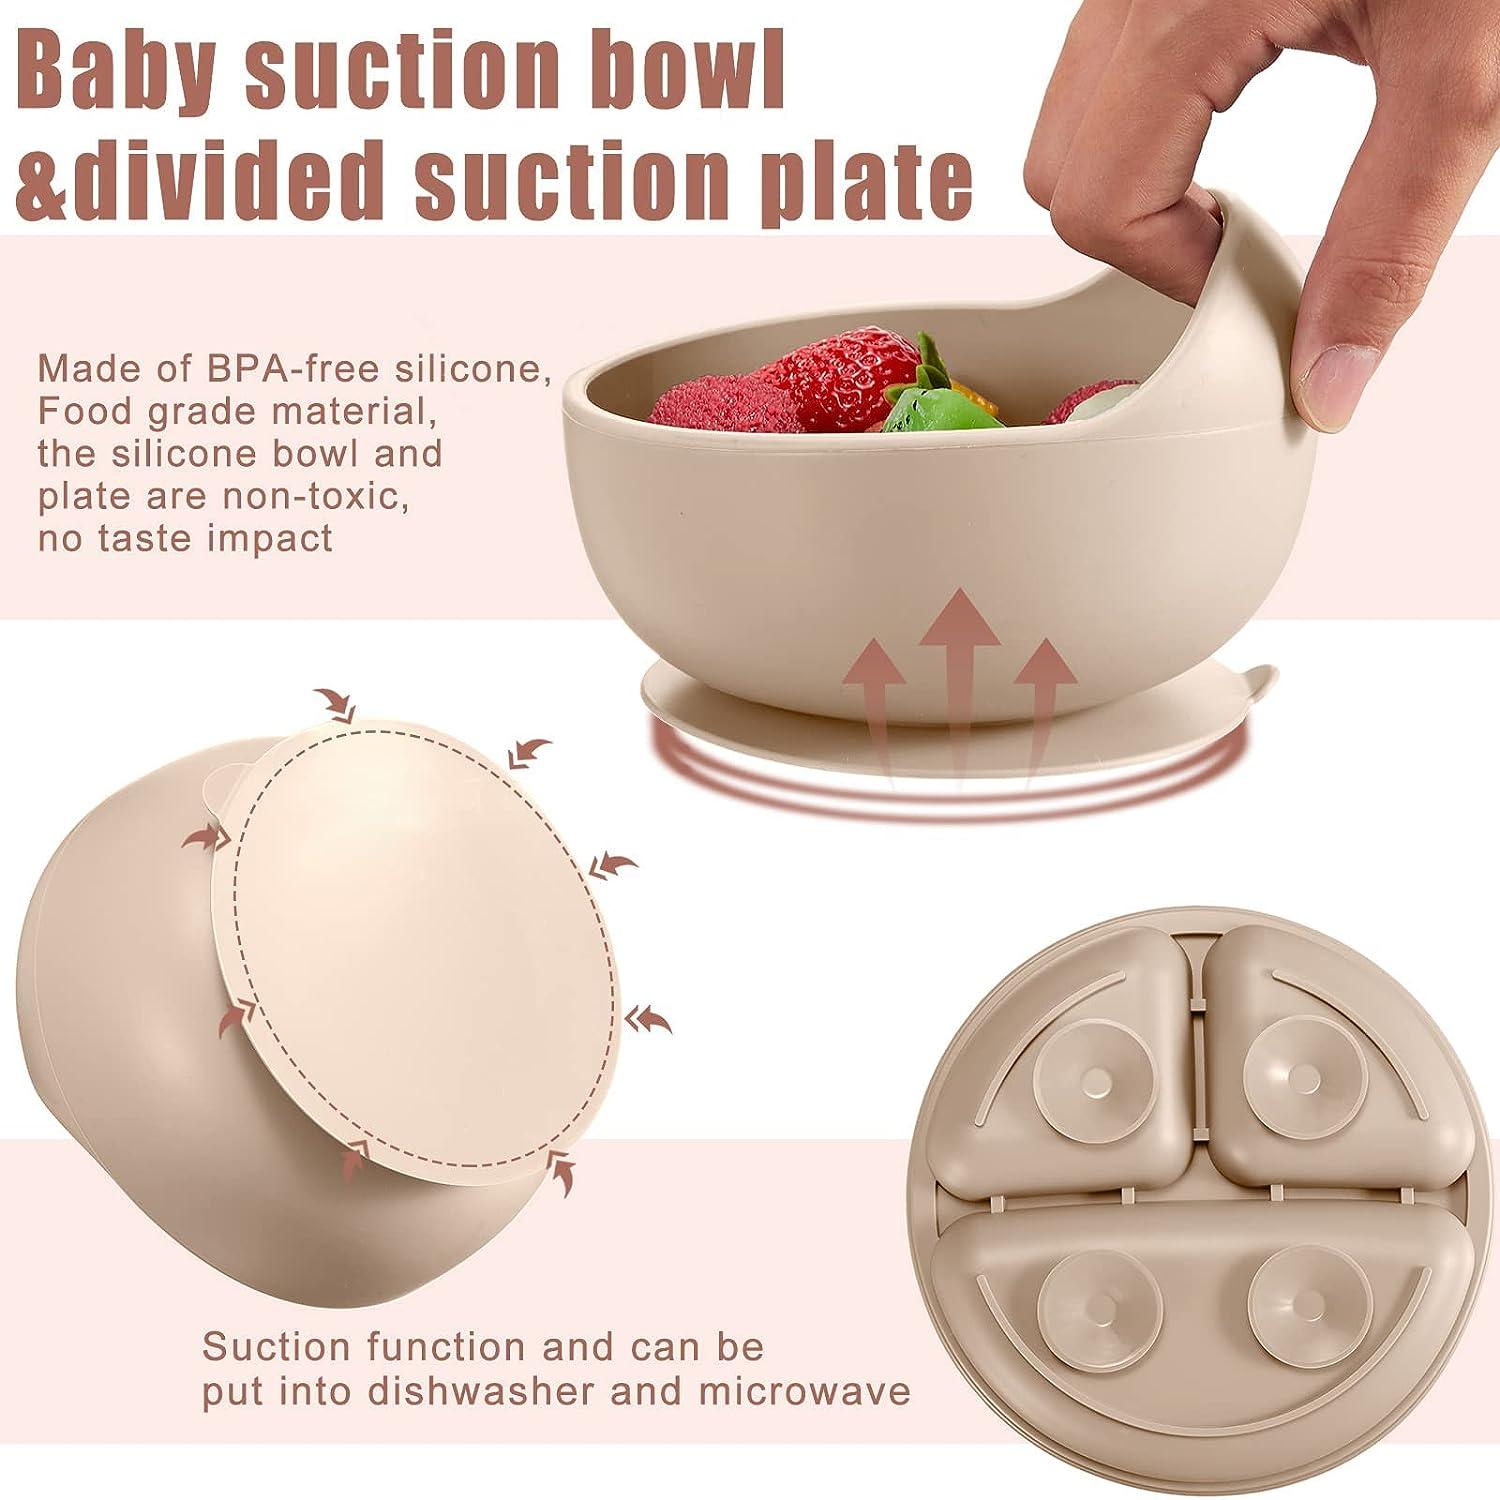 Baby Led Weaning Bowls, Plates and Spoons